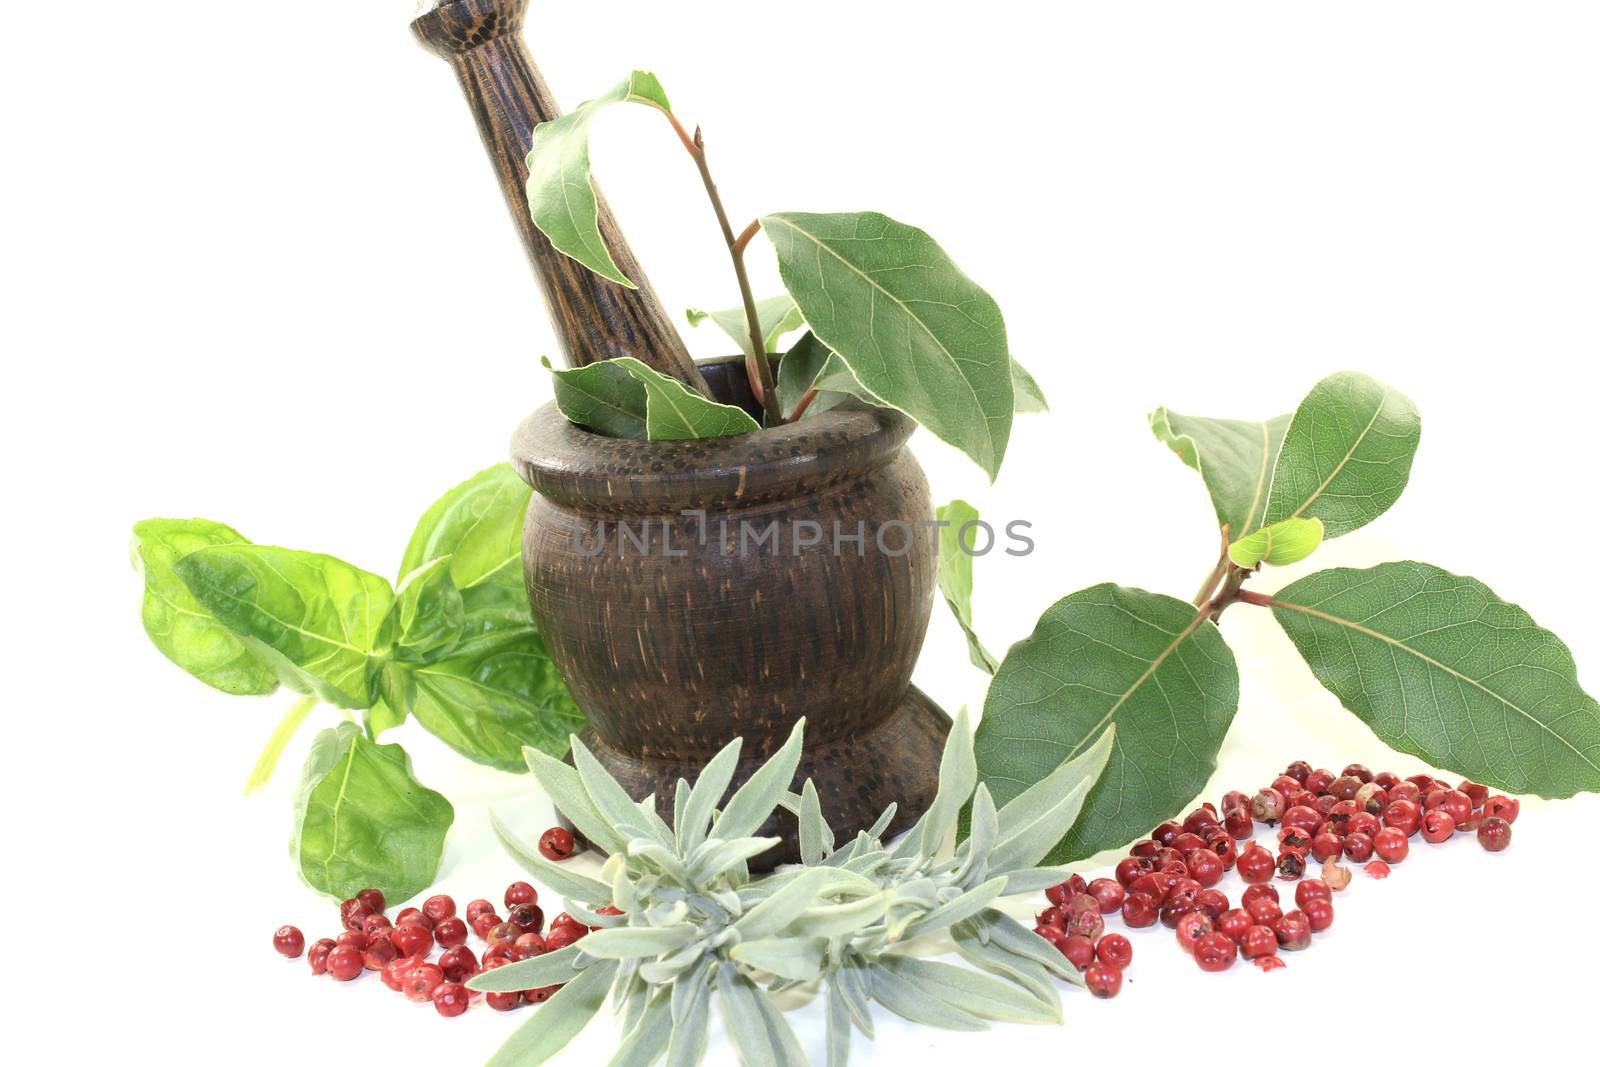 Laurel, sage and basil with Pepper, mortar by discovery